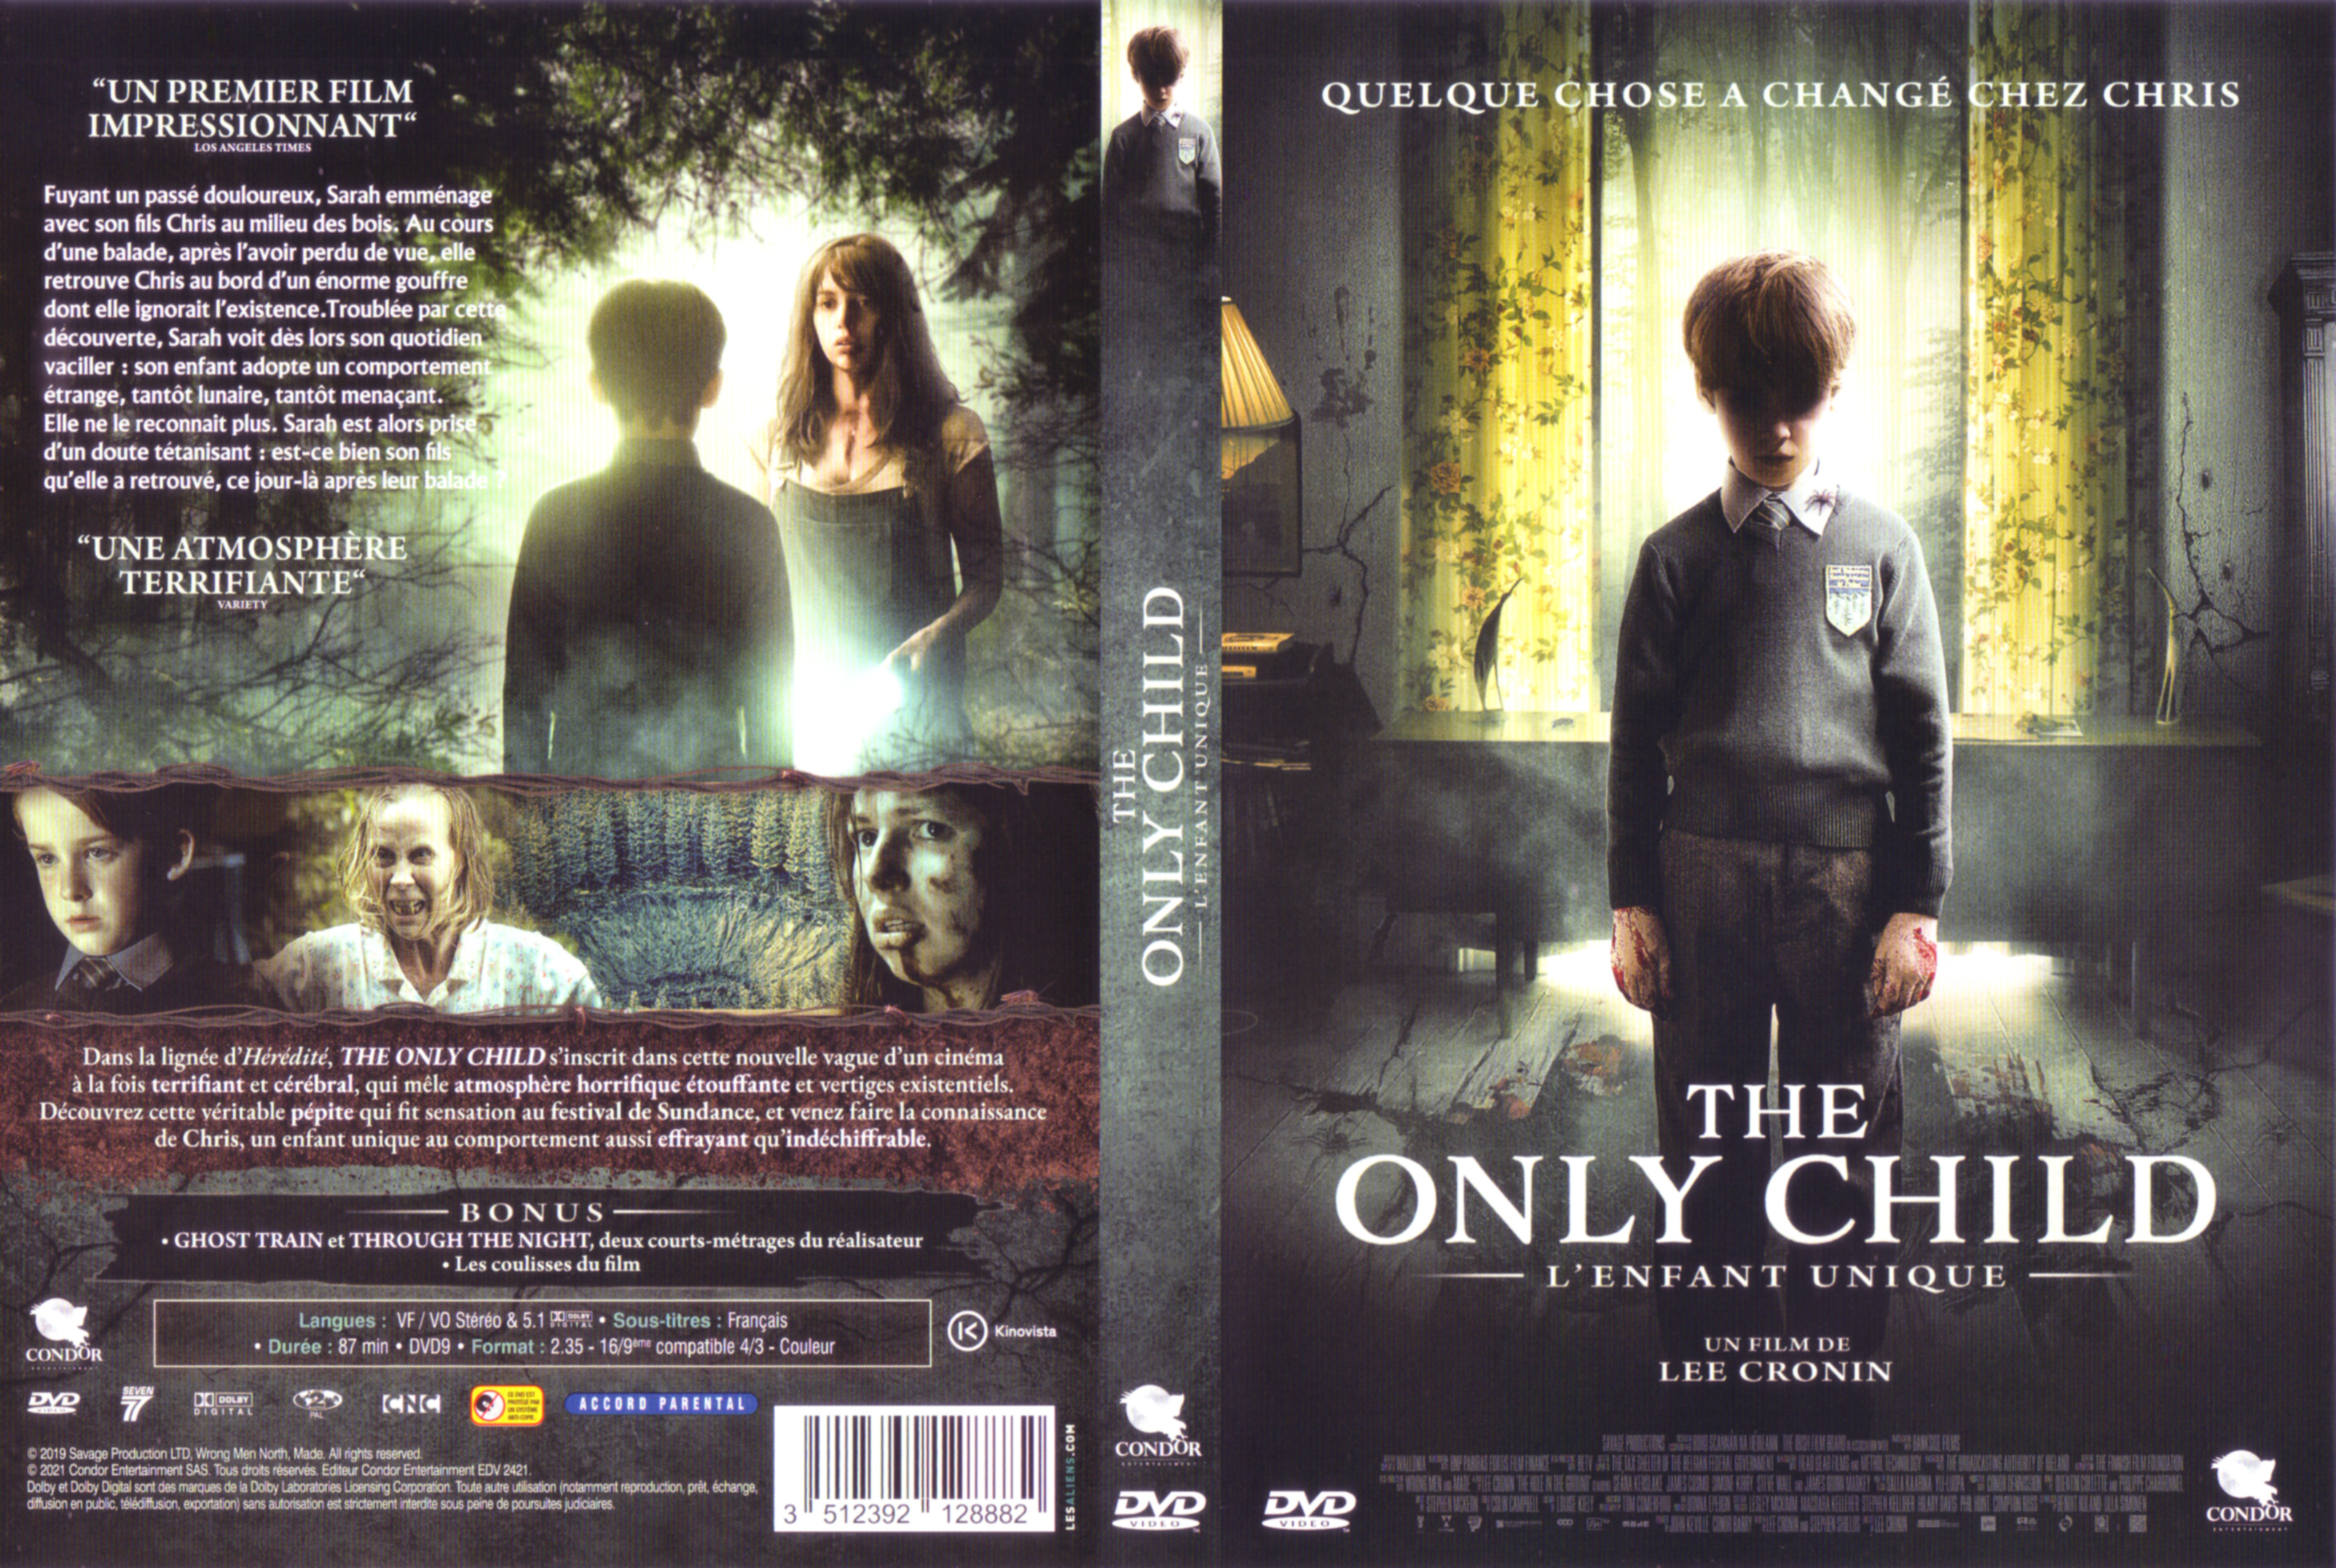 Jaquette DVD The only child